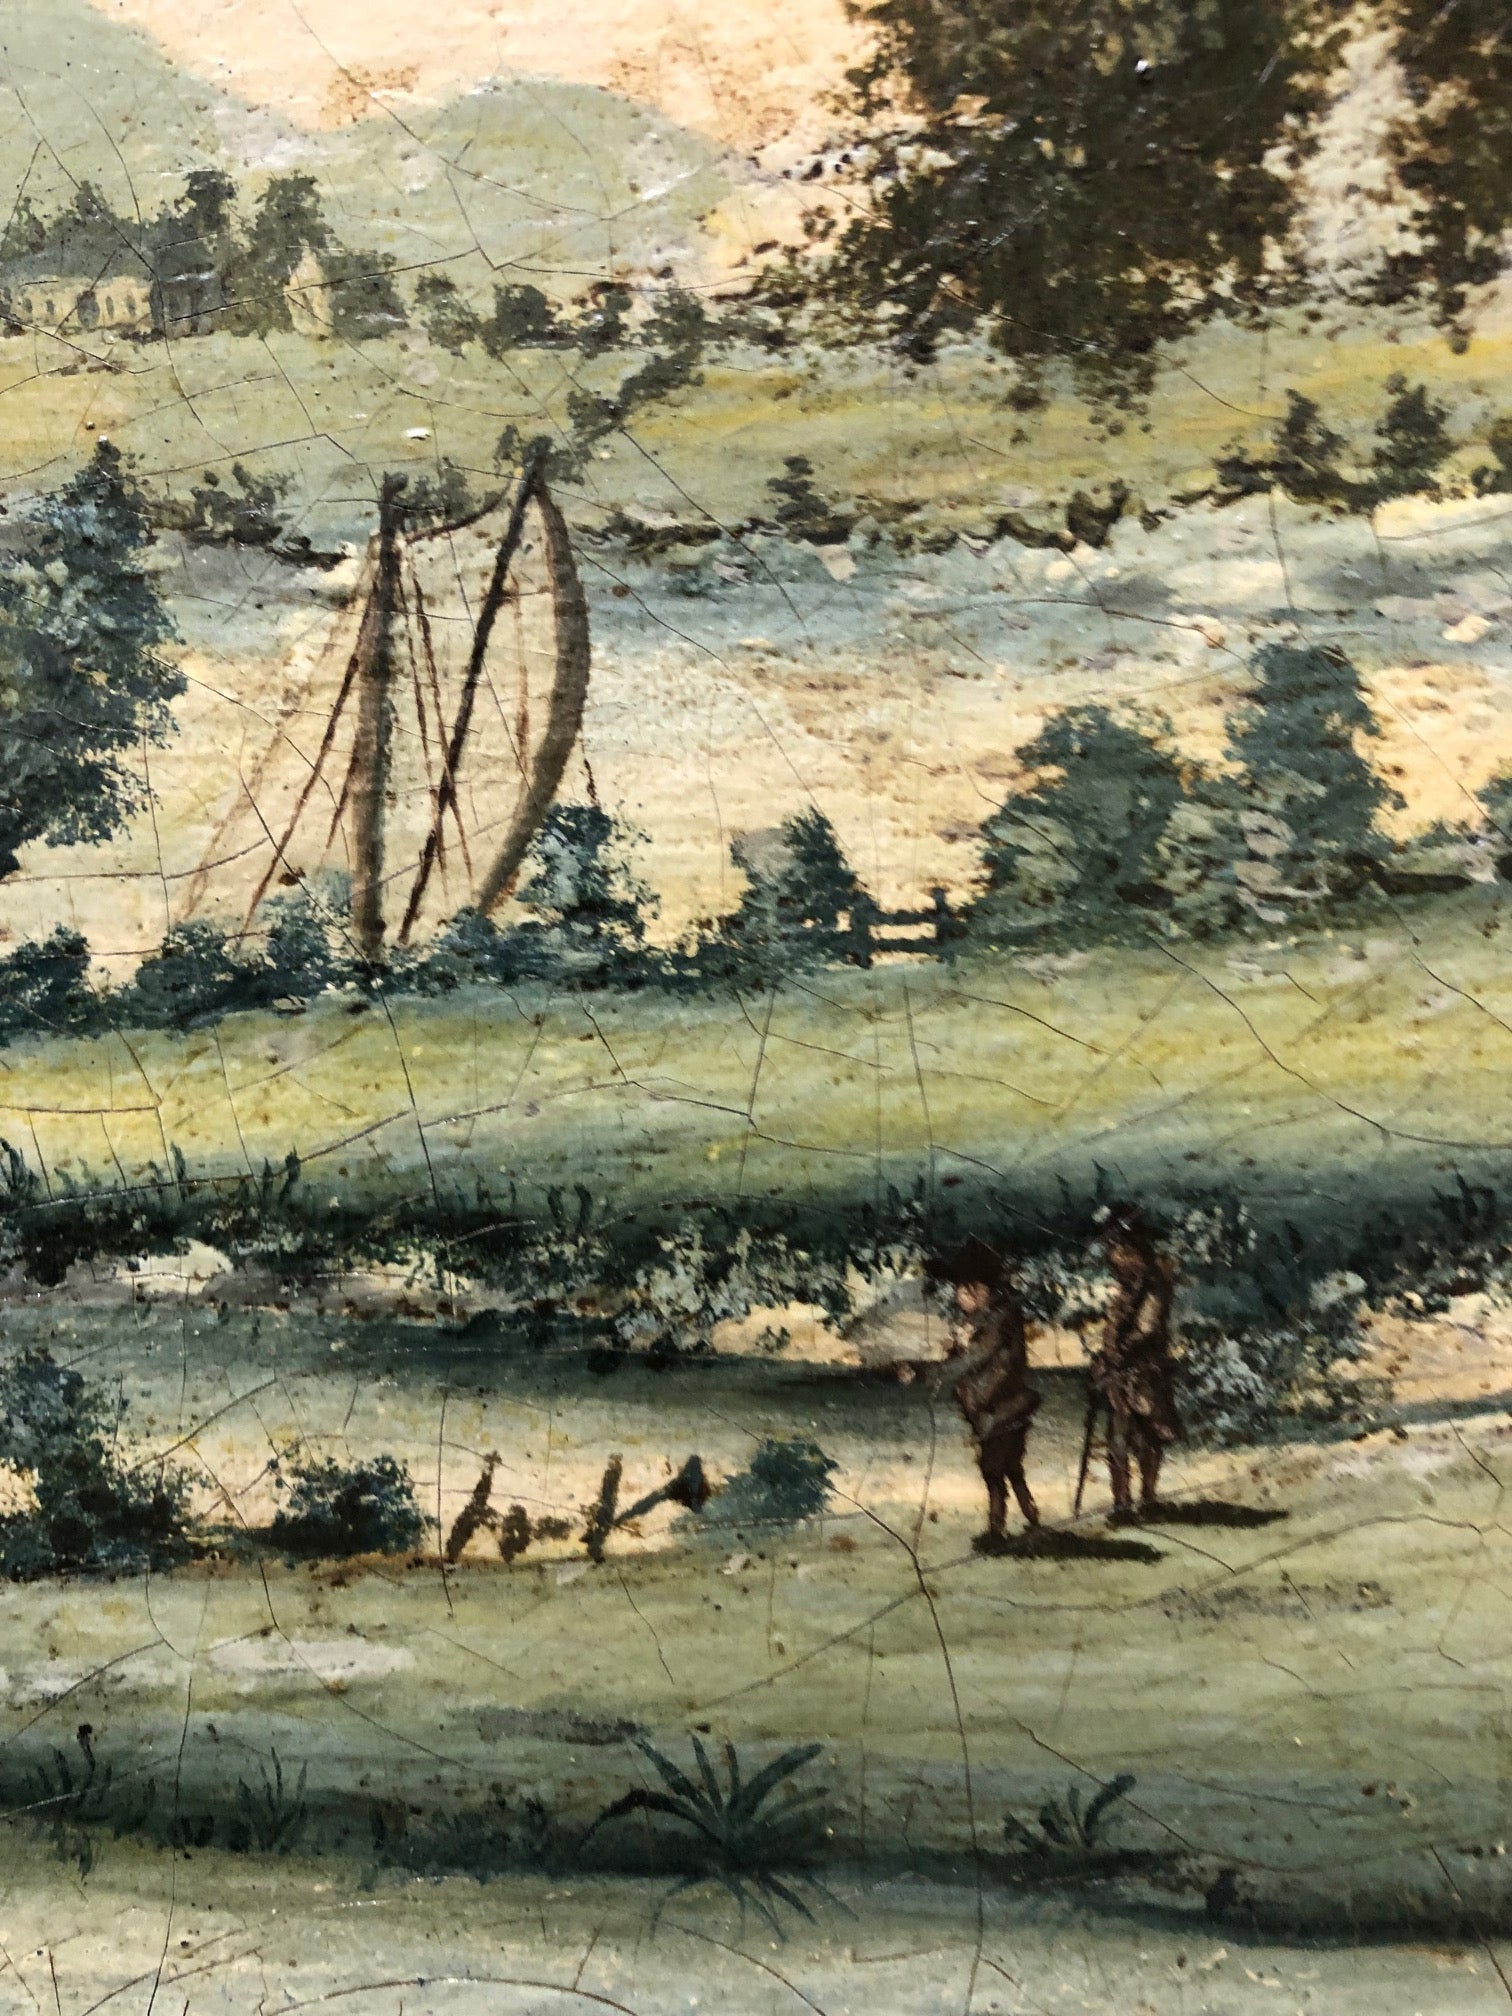 Hunt Scene with Hounds in an English Country Landscape, Circa 1785